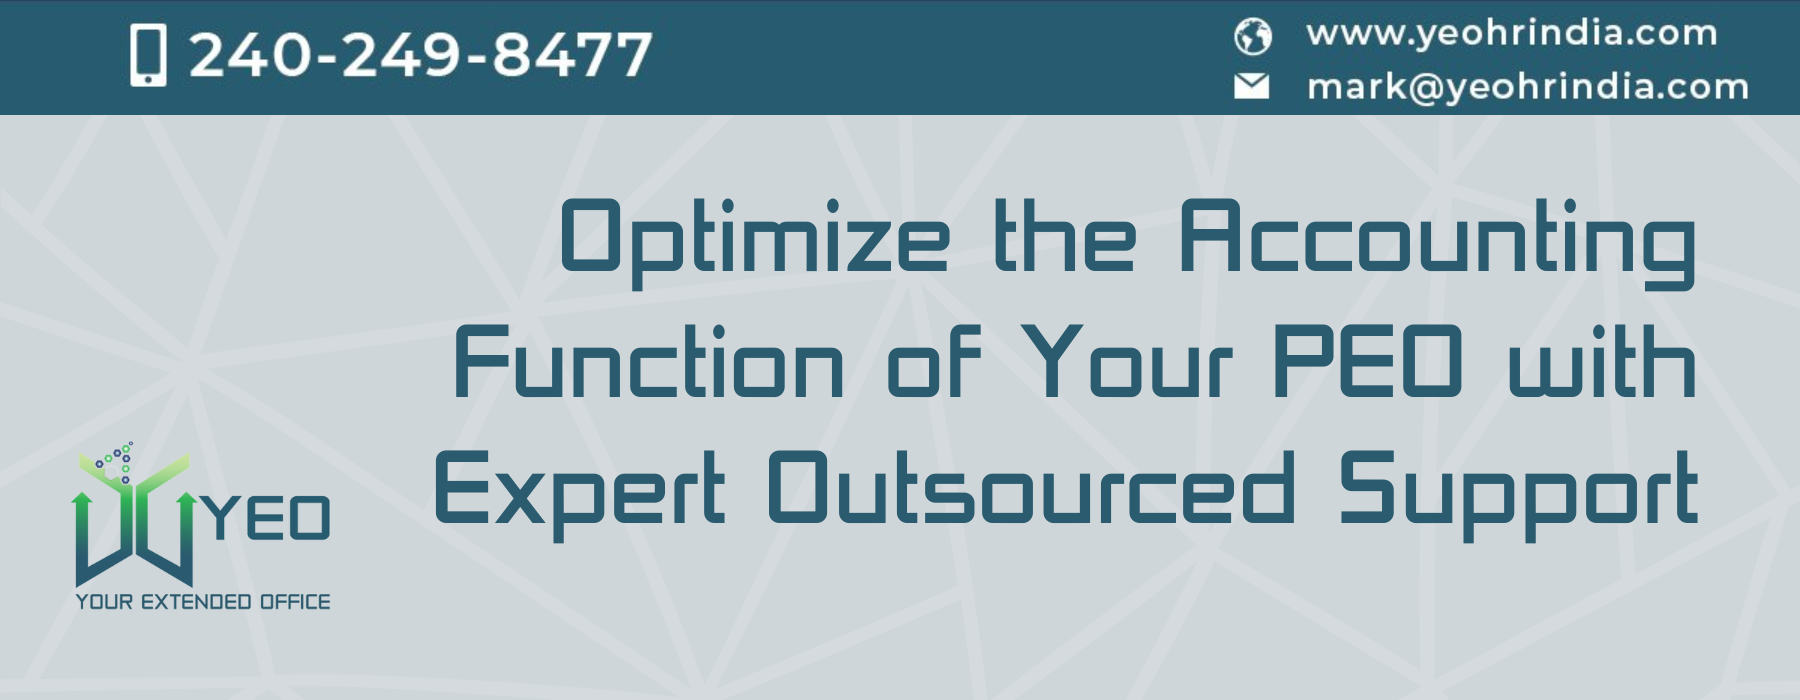 Optimize the Accounting Function of Your PEO with Expert Outsourced Support